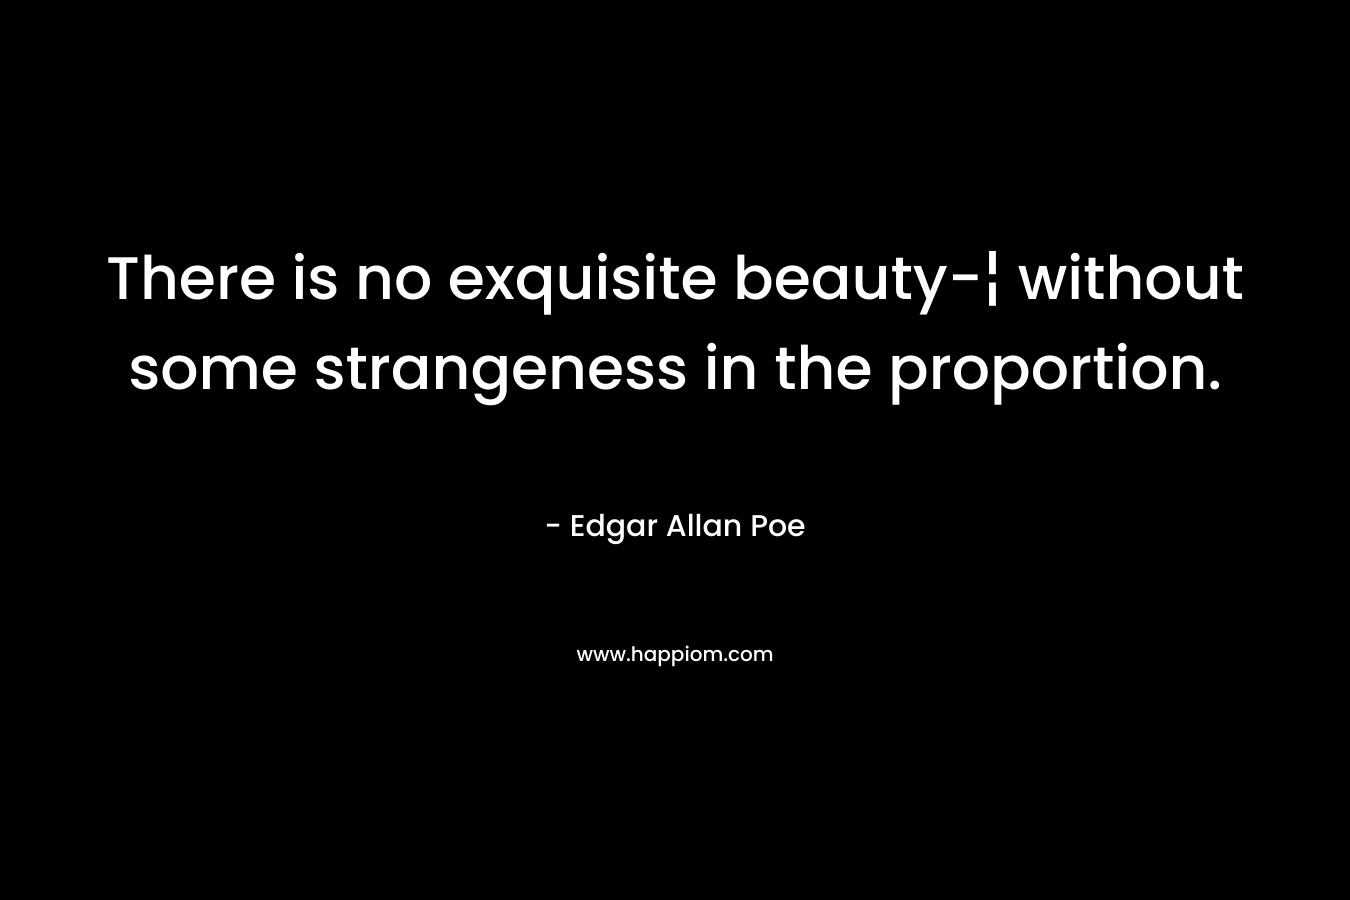 There is no exquisite beauty-¦ without some strangeness in the proportion.